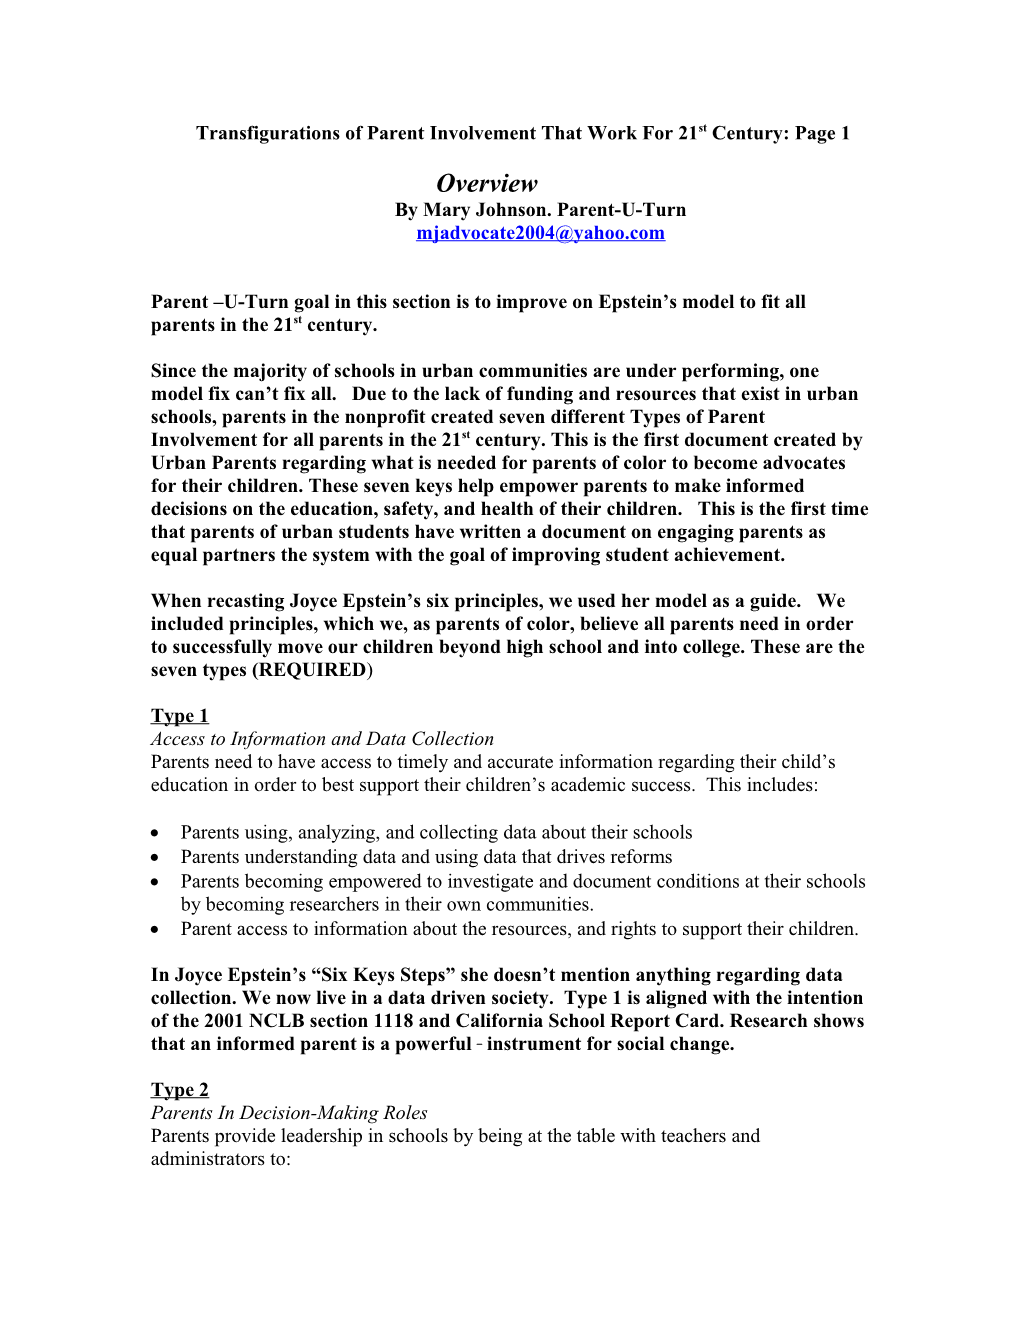 Transfigurations of Parent Involvement That Work for 21St Century: Page 1